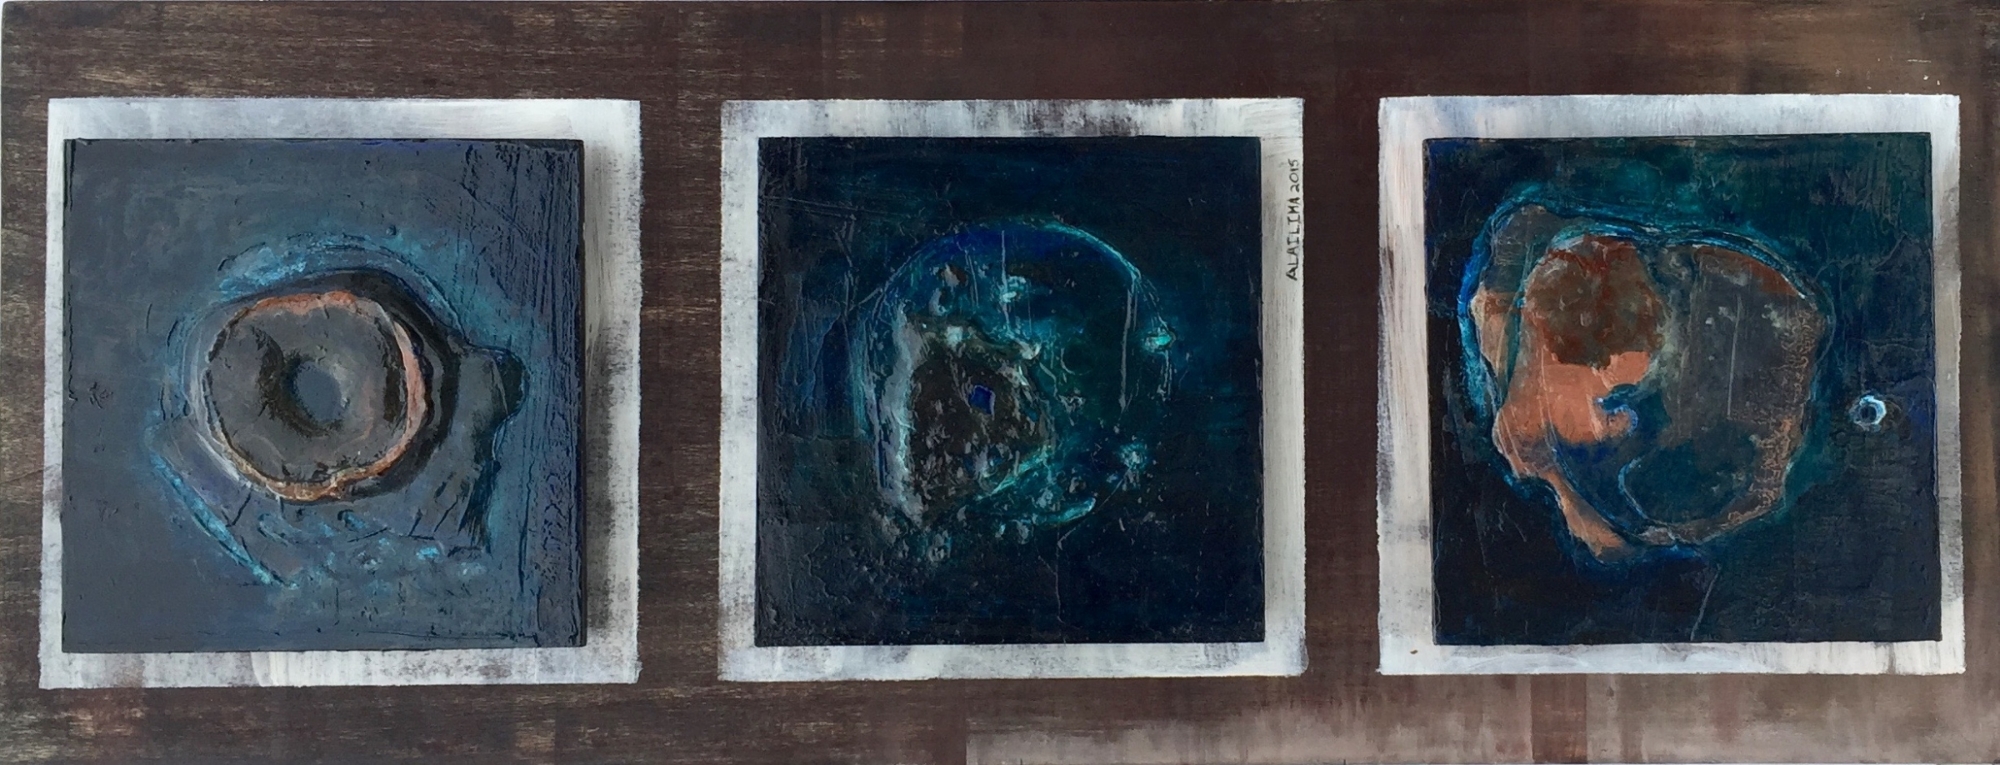   Imaginary Topography   Oil on Wood Panels  24" x 9.5"  2015 